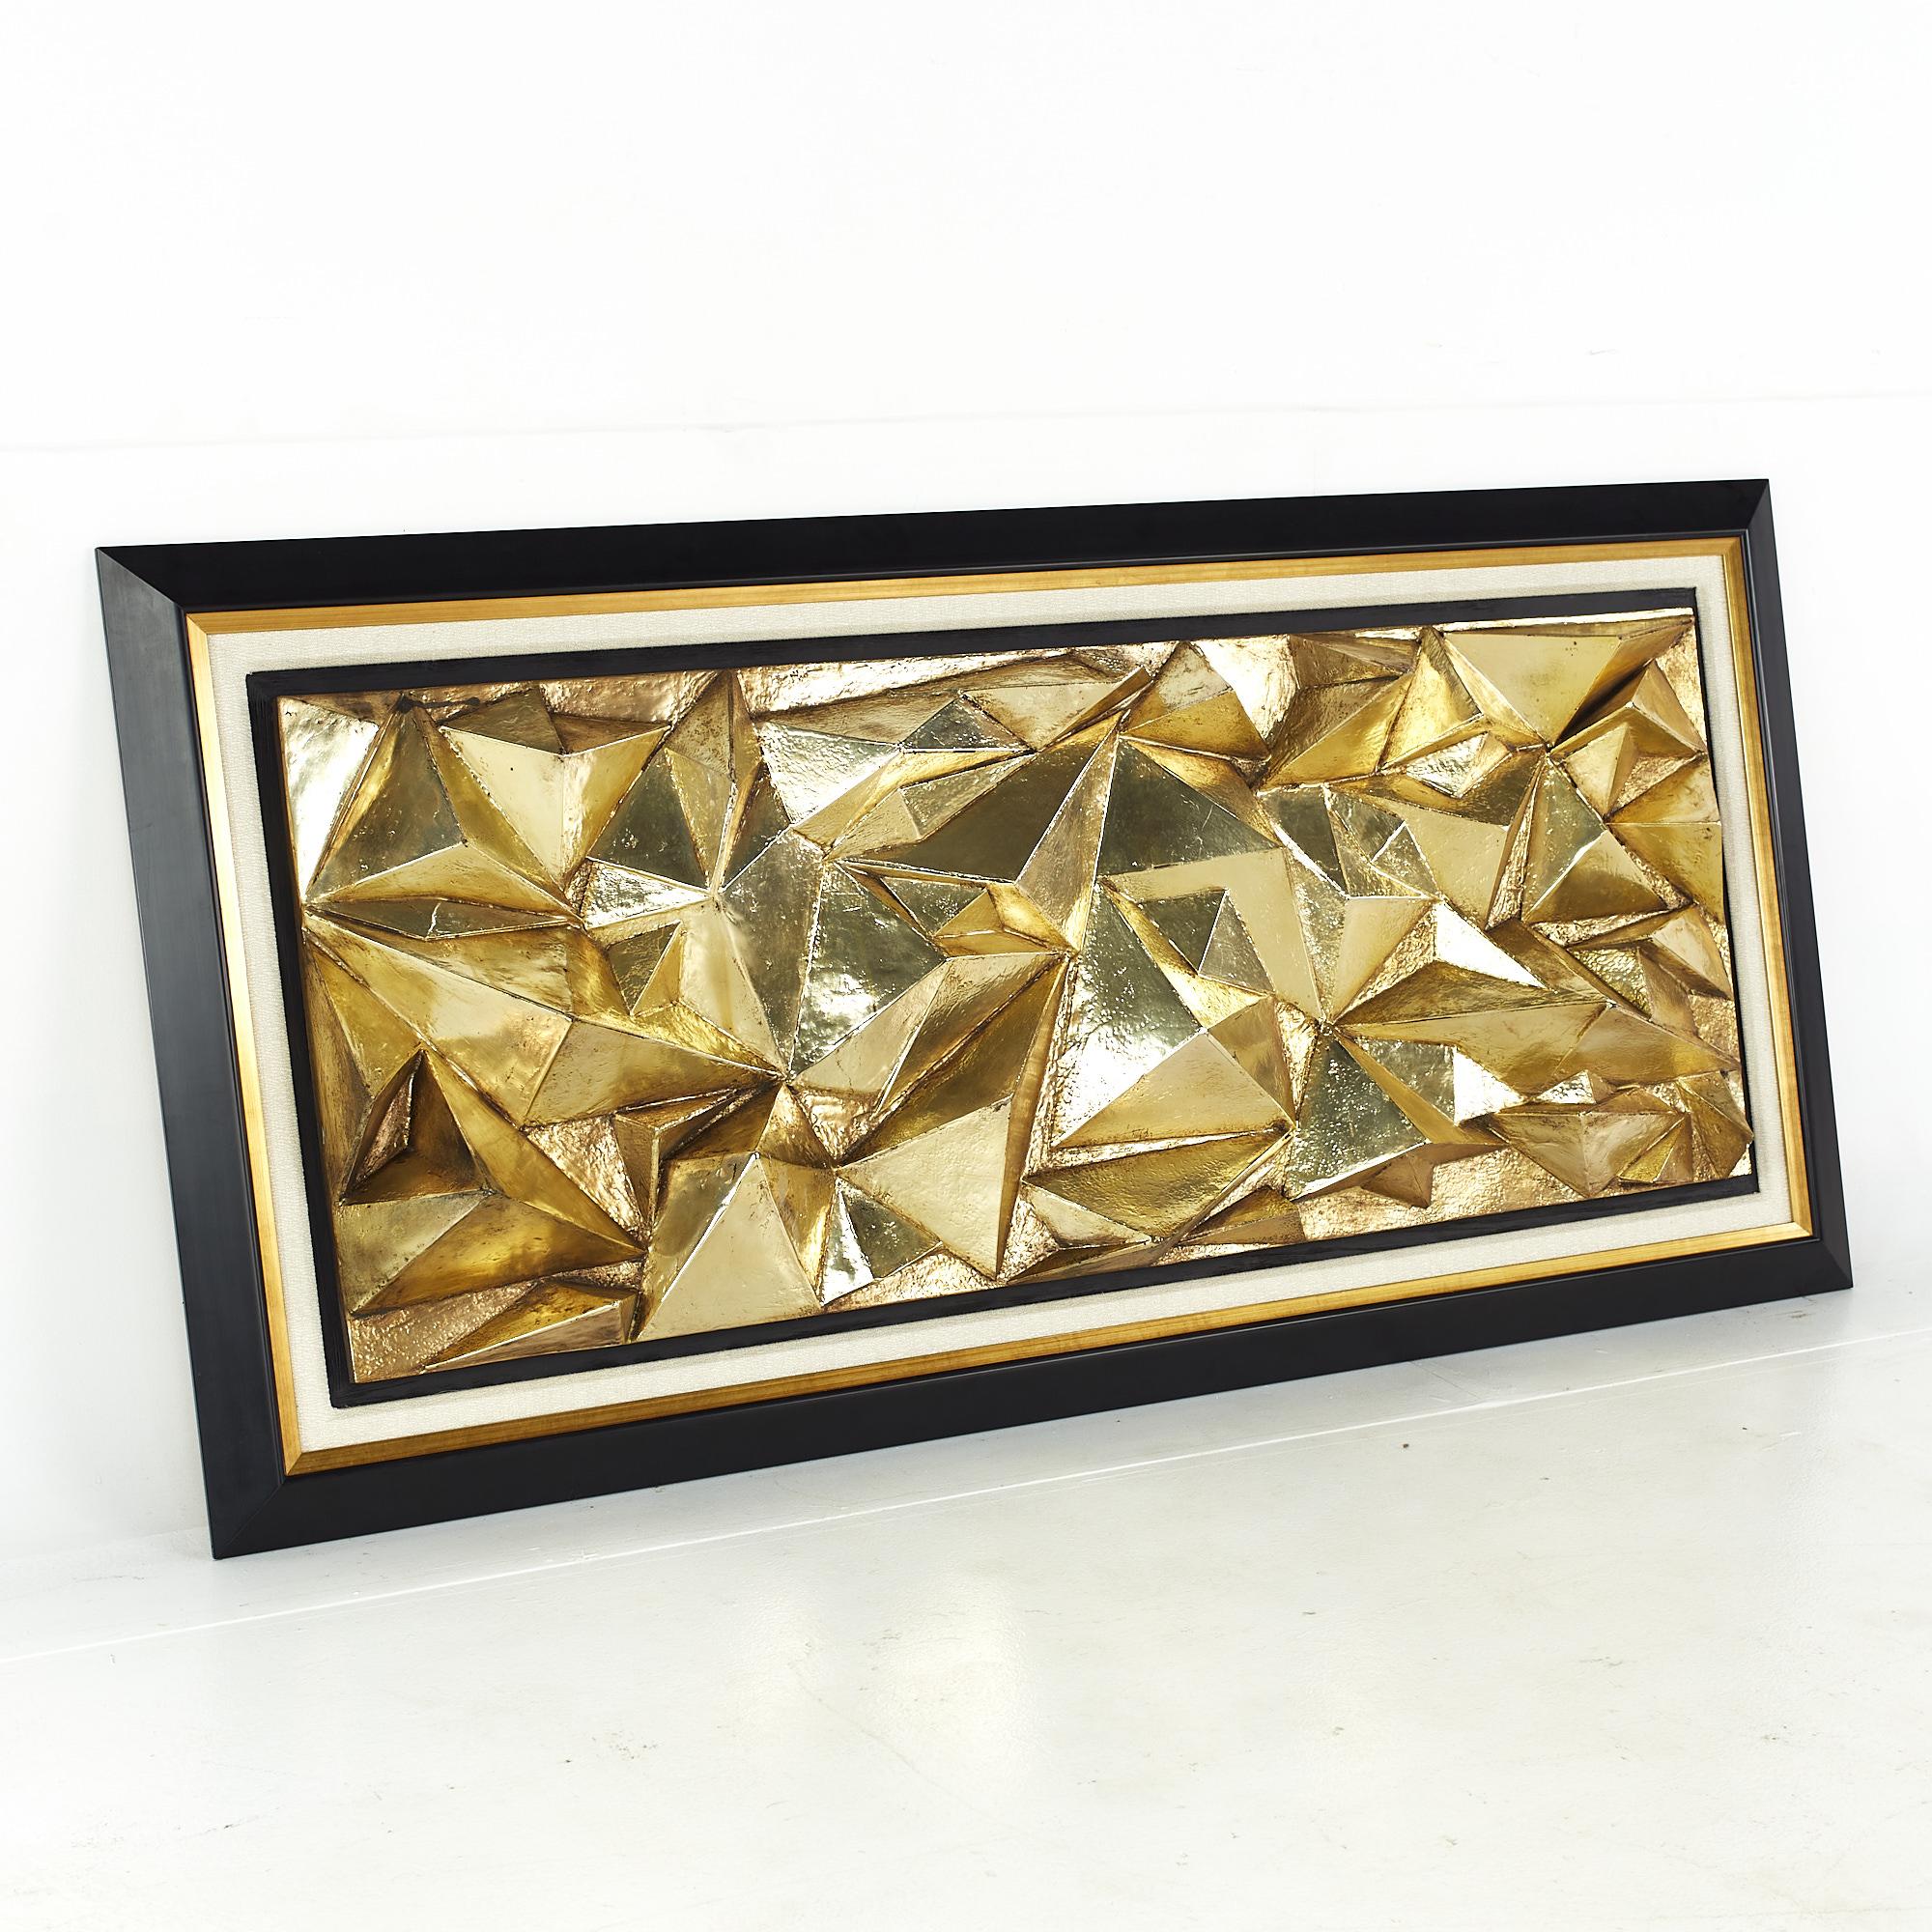 Mid Century large decorative bronze painted wall sculpture

This sculpture measures: 70.25 wide x 6 deep x 34.75 inches high

We take our photos in a controlled lighting studio to show as much detail as possible. We do not photoshop out